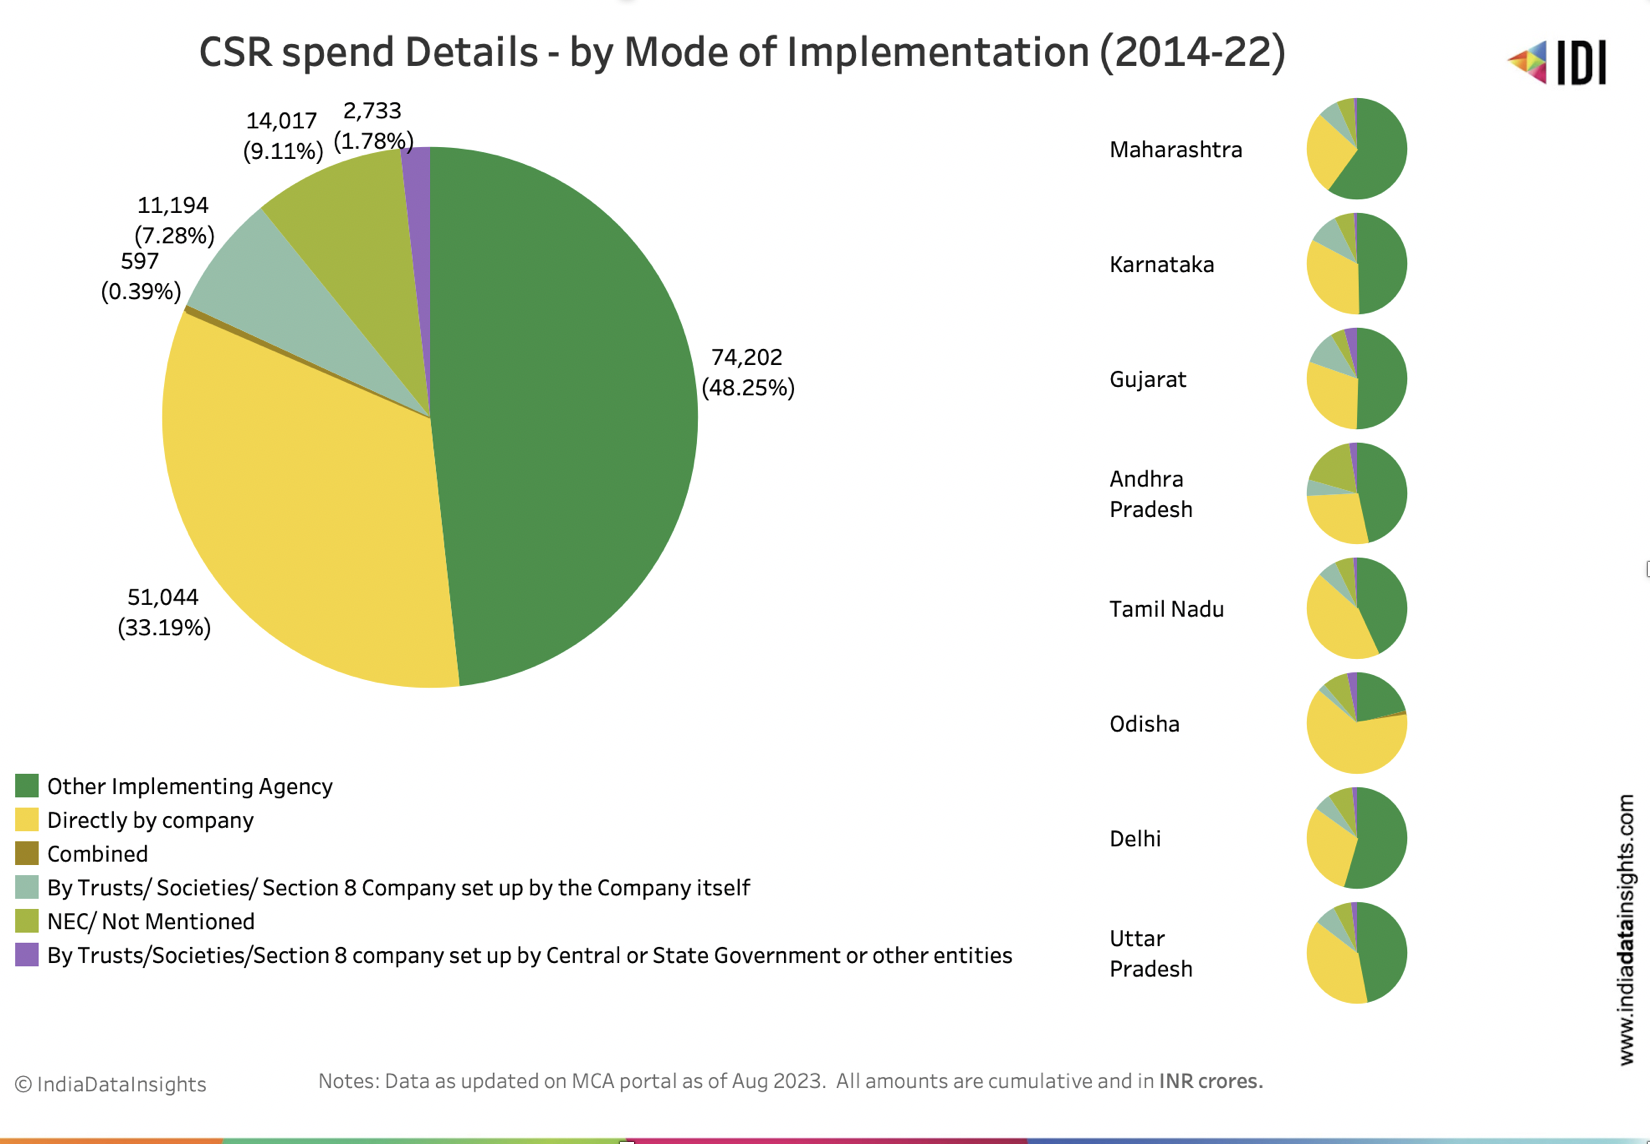 CSR spend by mode of implementation